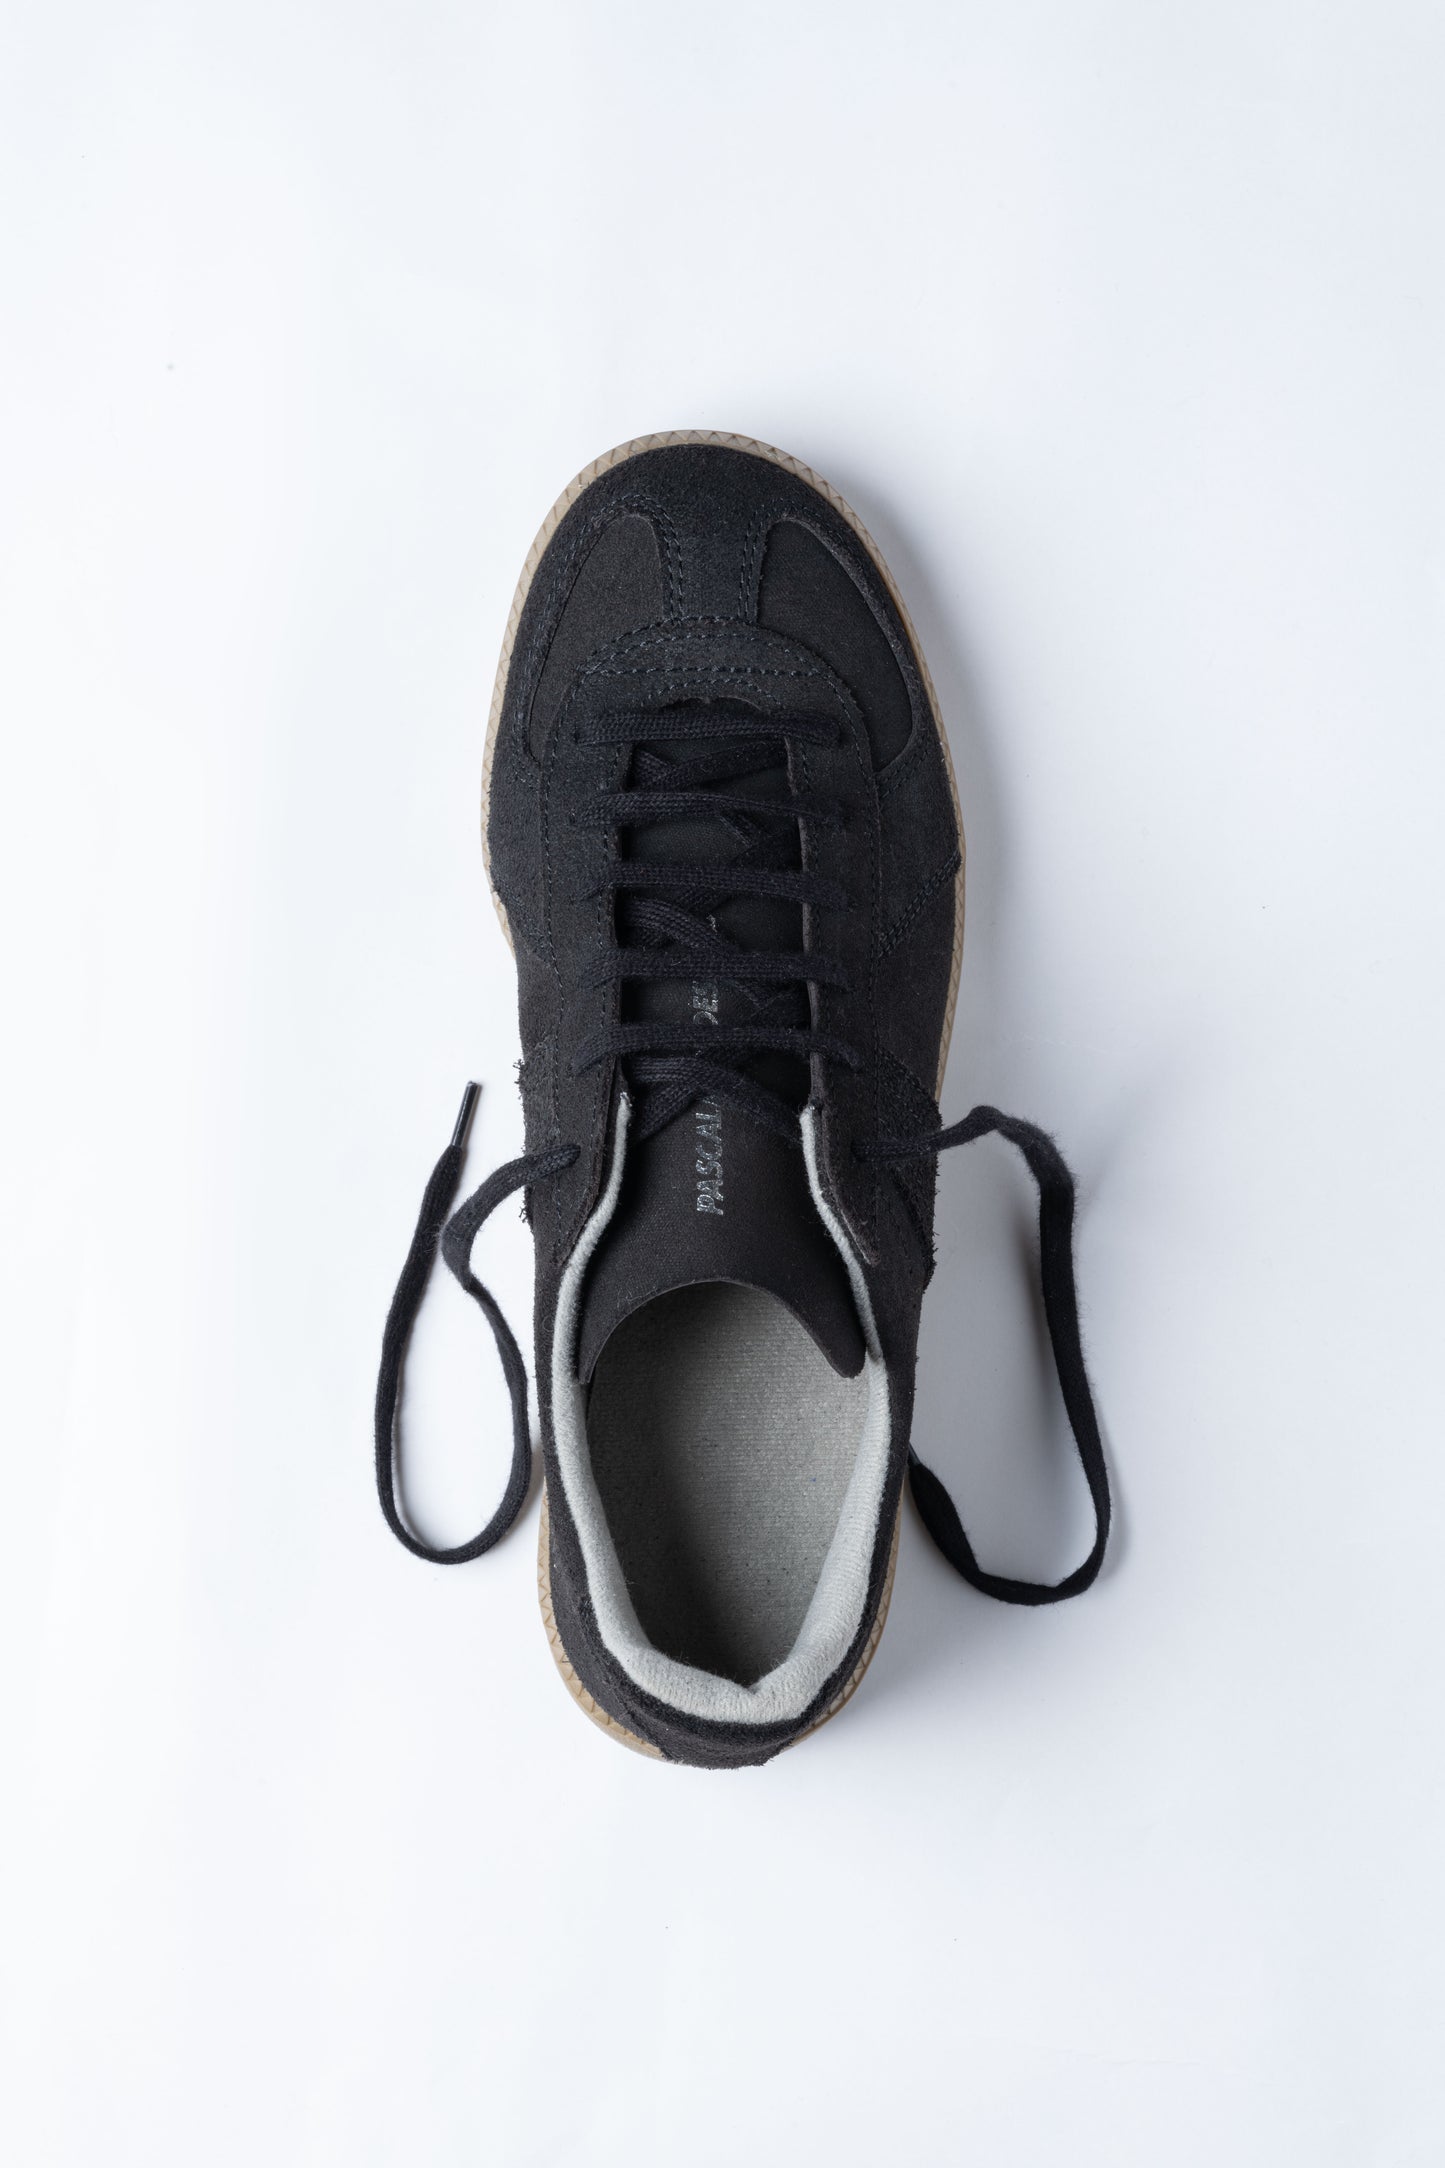 GERMAN TRAINER ORIGINAL MODEL MEETS SUSTAINABLE BY PMD